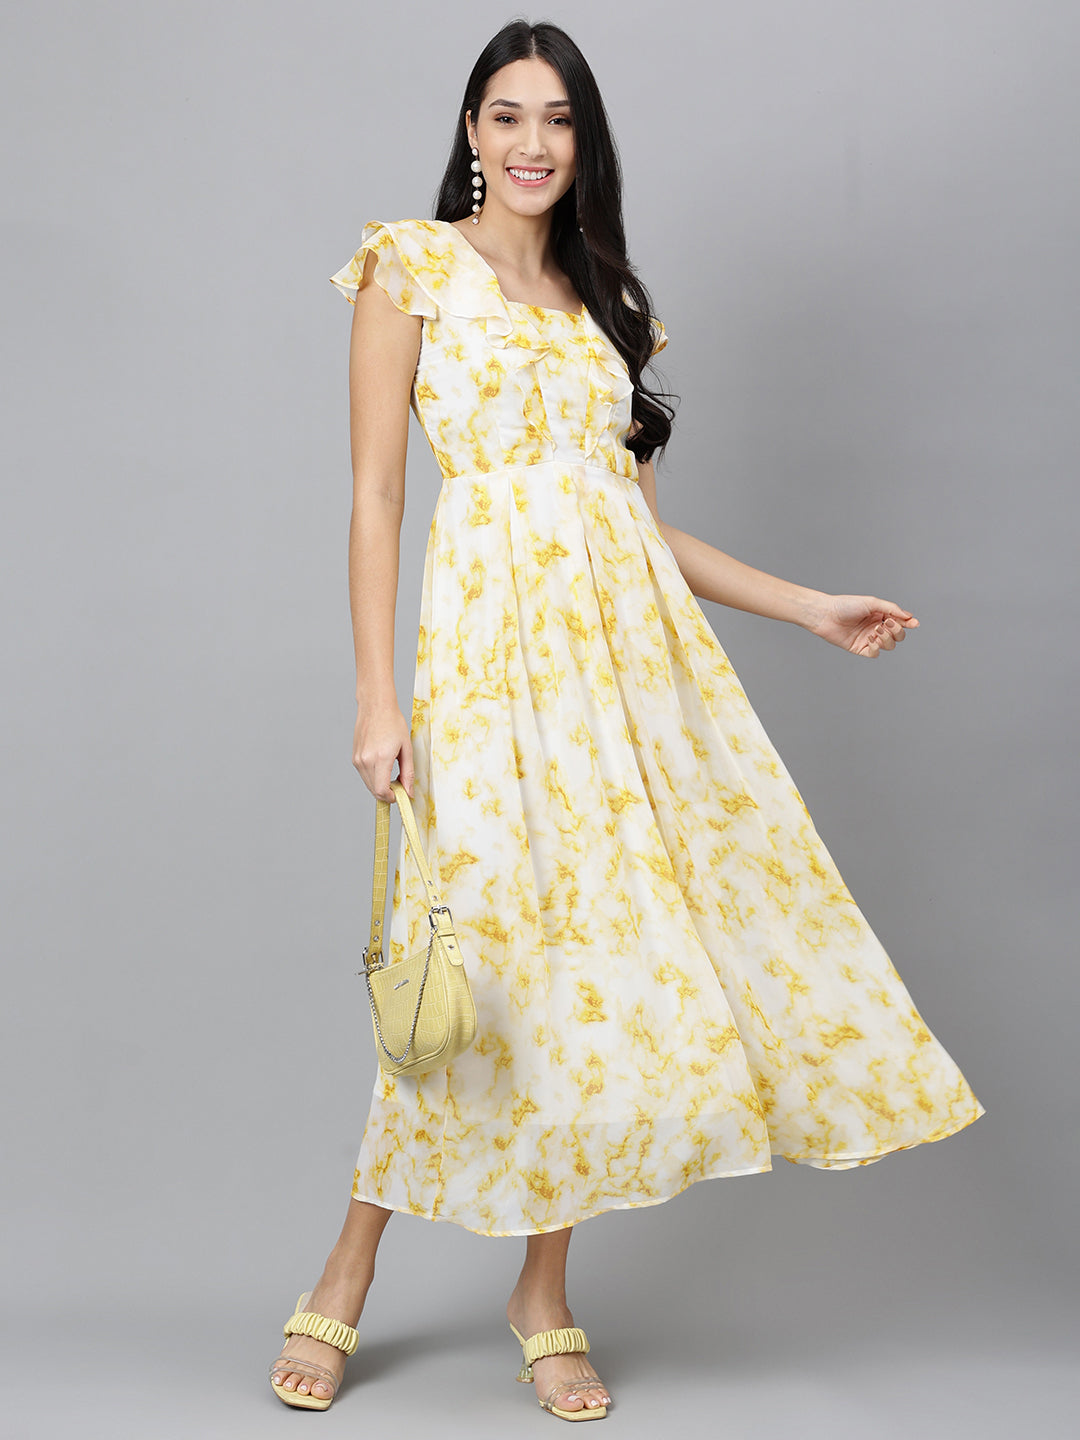 Yellow Short Sleeves Square Neck Dyed Maxi Dress For Casual Wear